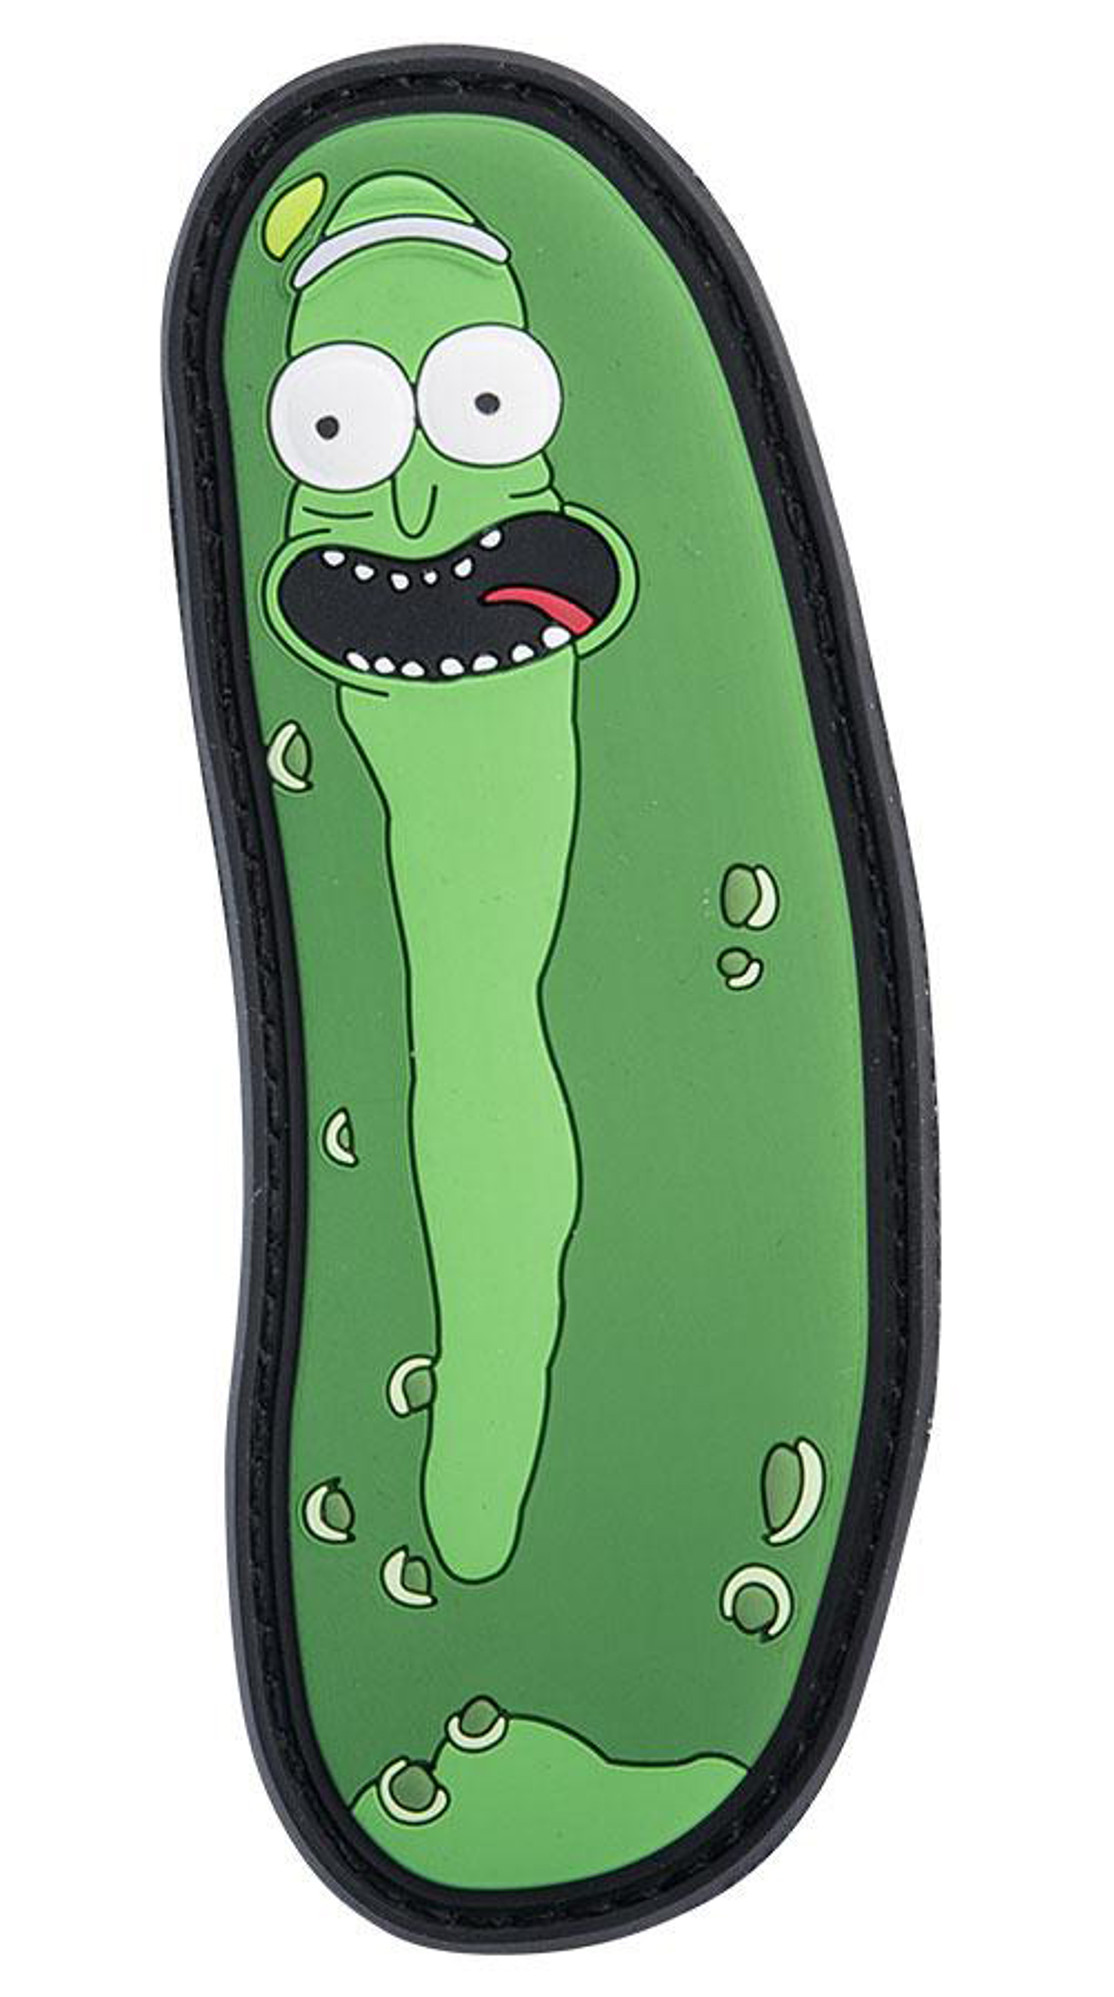 Tactical Outfitters "Pickle Rick 3D" PVC Morale Patch